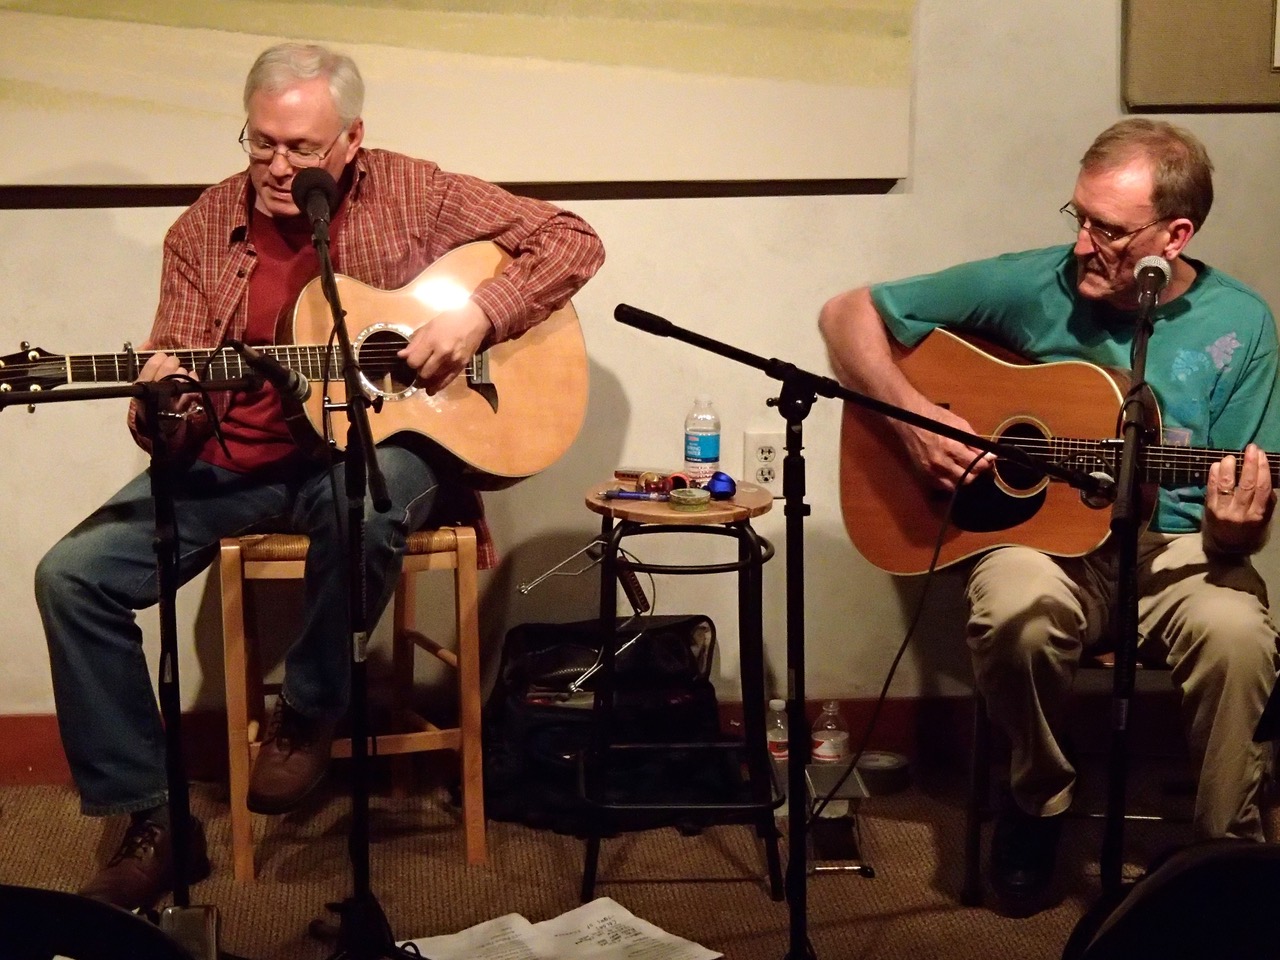 John Heasley & Jerry Schroeder - Songbag Concert - May 13, 2018, 4:00pm